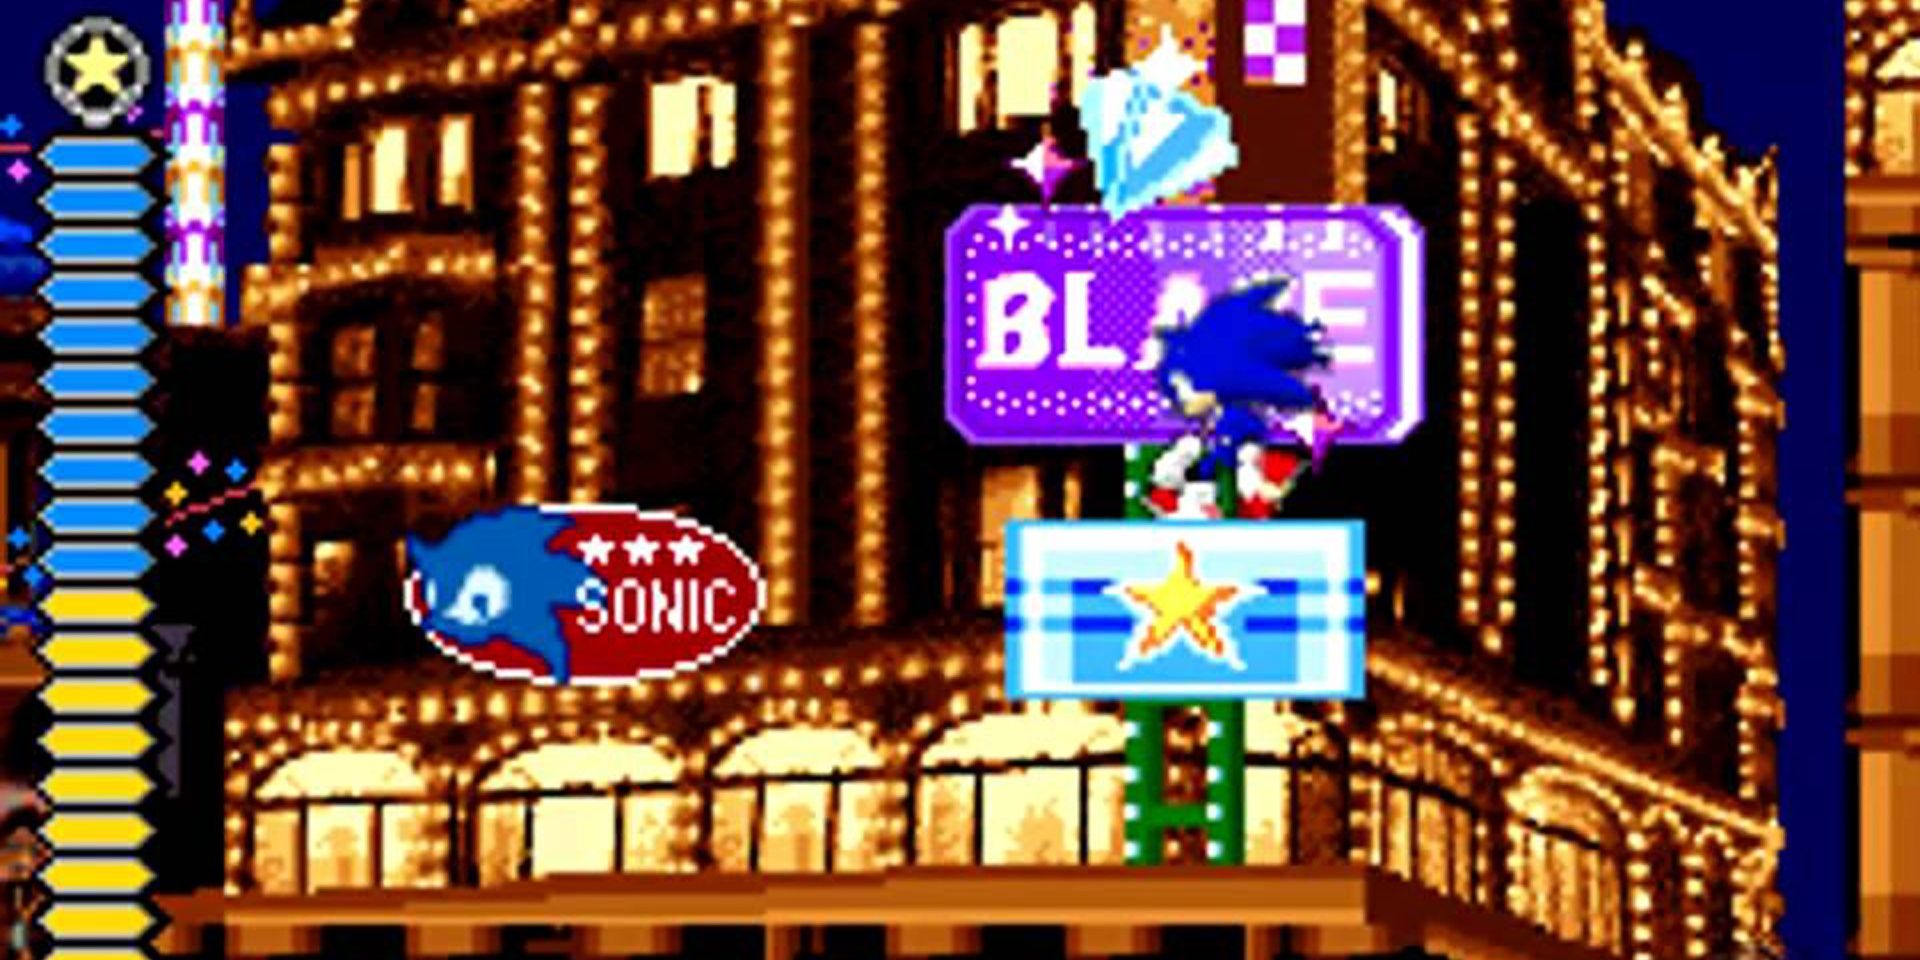 A screenshot of Sonic the Hedgehog in the level "Night Carnival" from Sonic Rush.